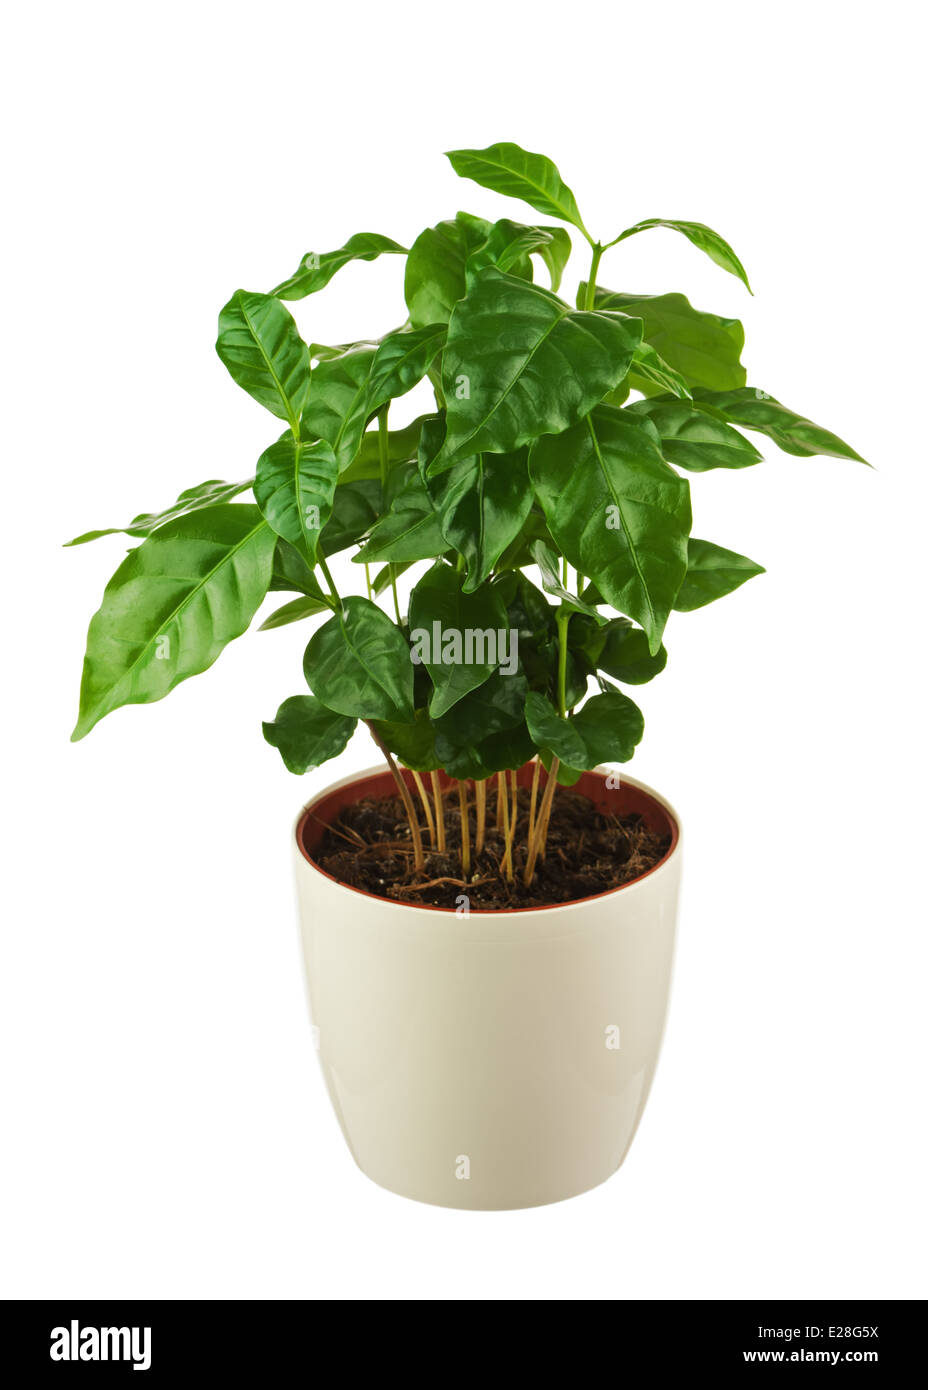 Coffee tree (Arabica Plant) in flower pot isolated on white background. Closeup. Stock Photo